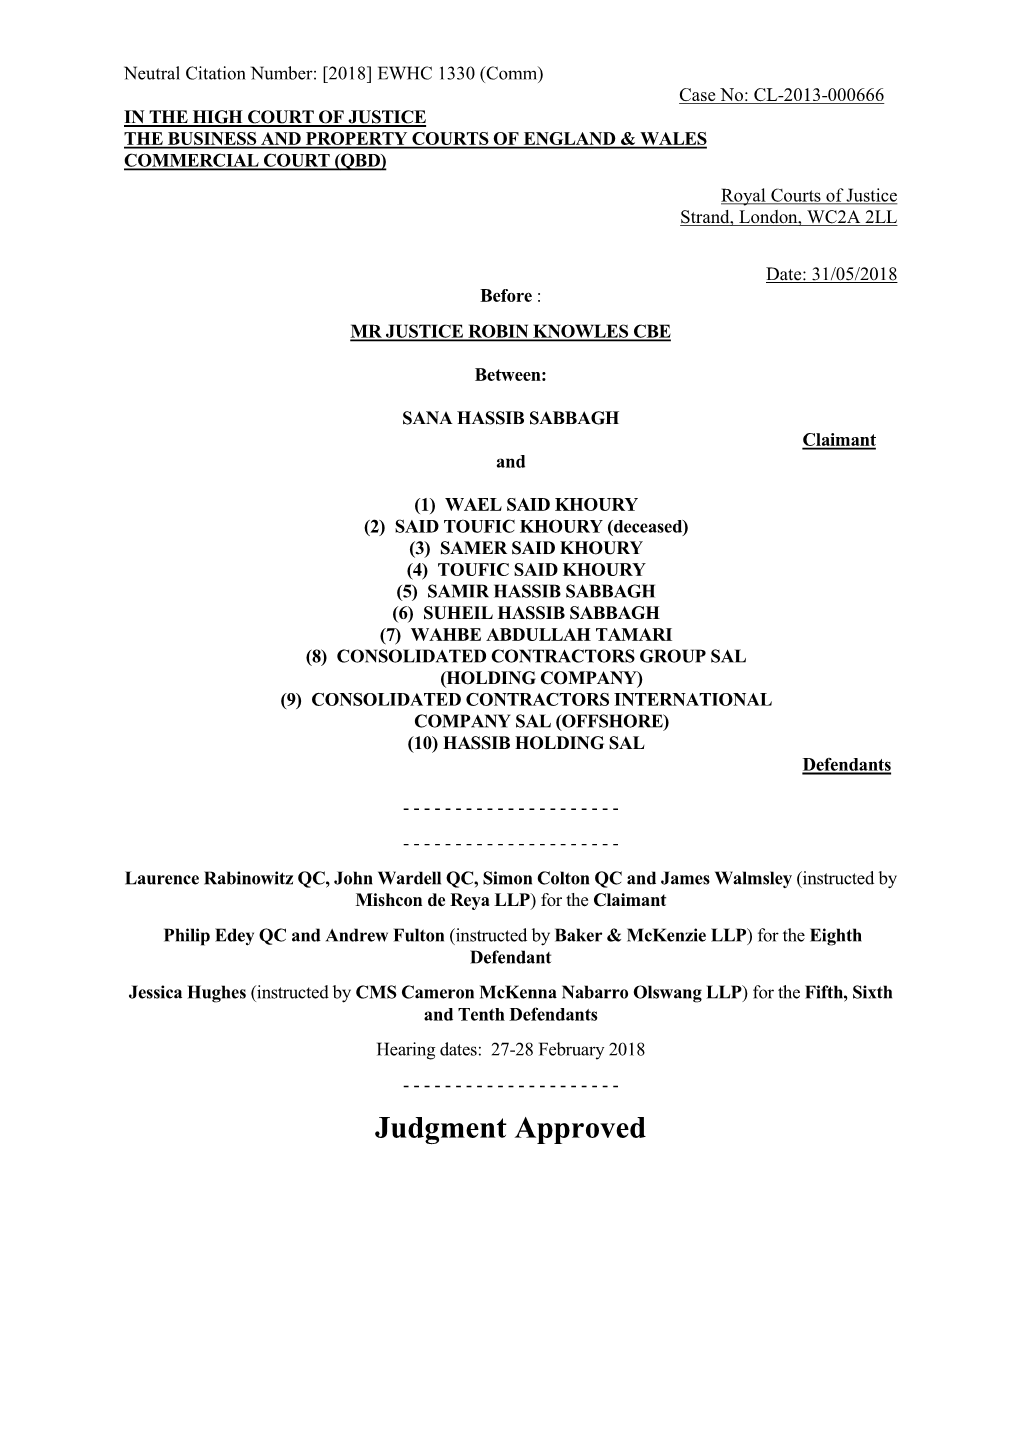 Judgment Approved Mr Justice Robin Knowles